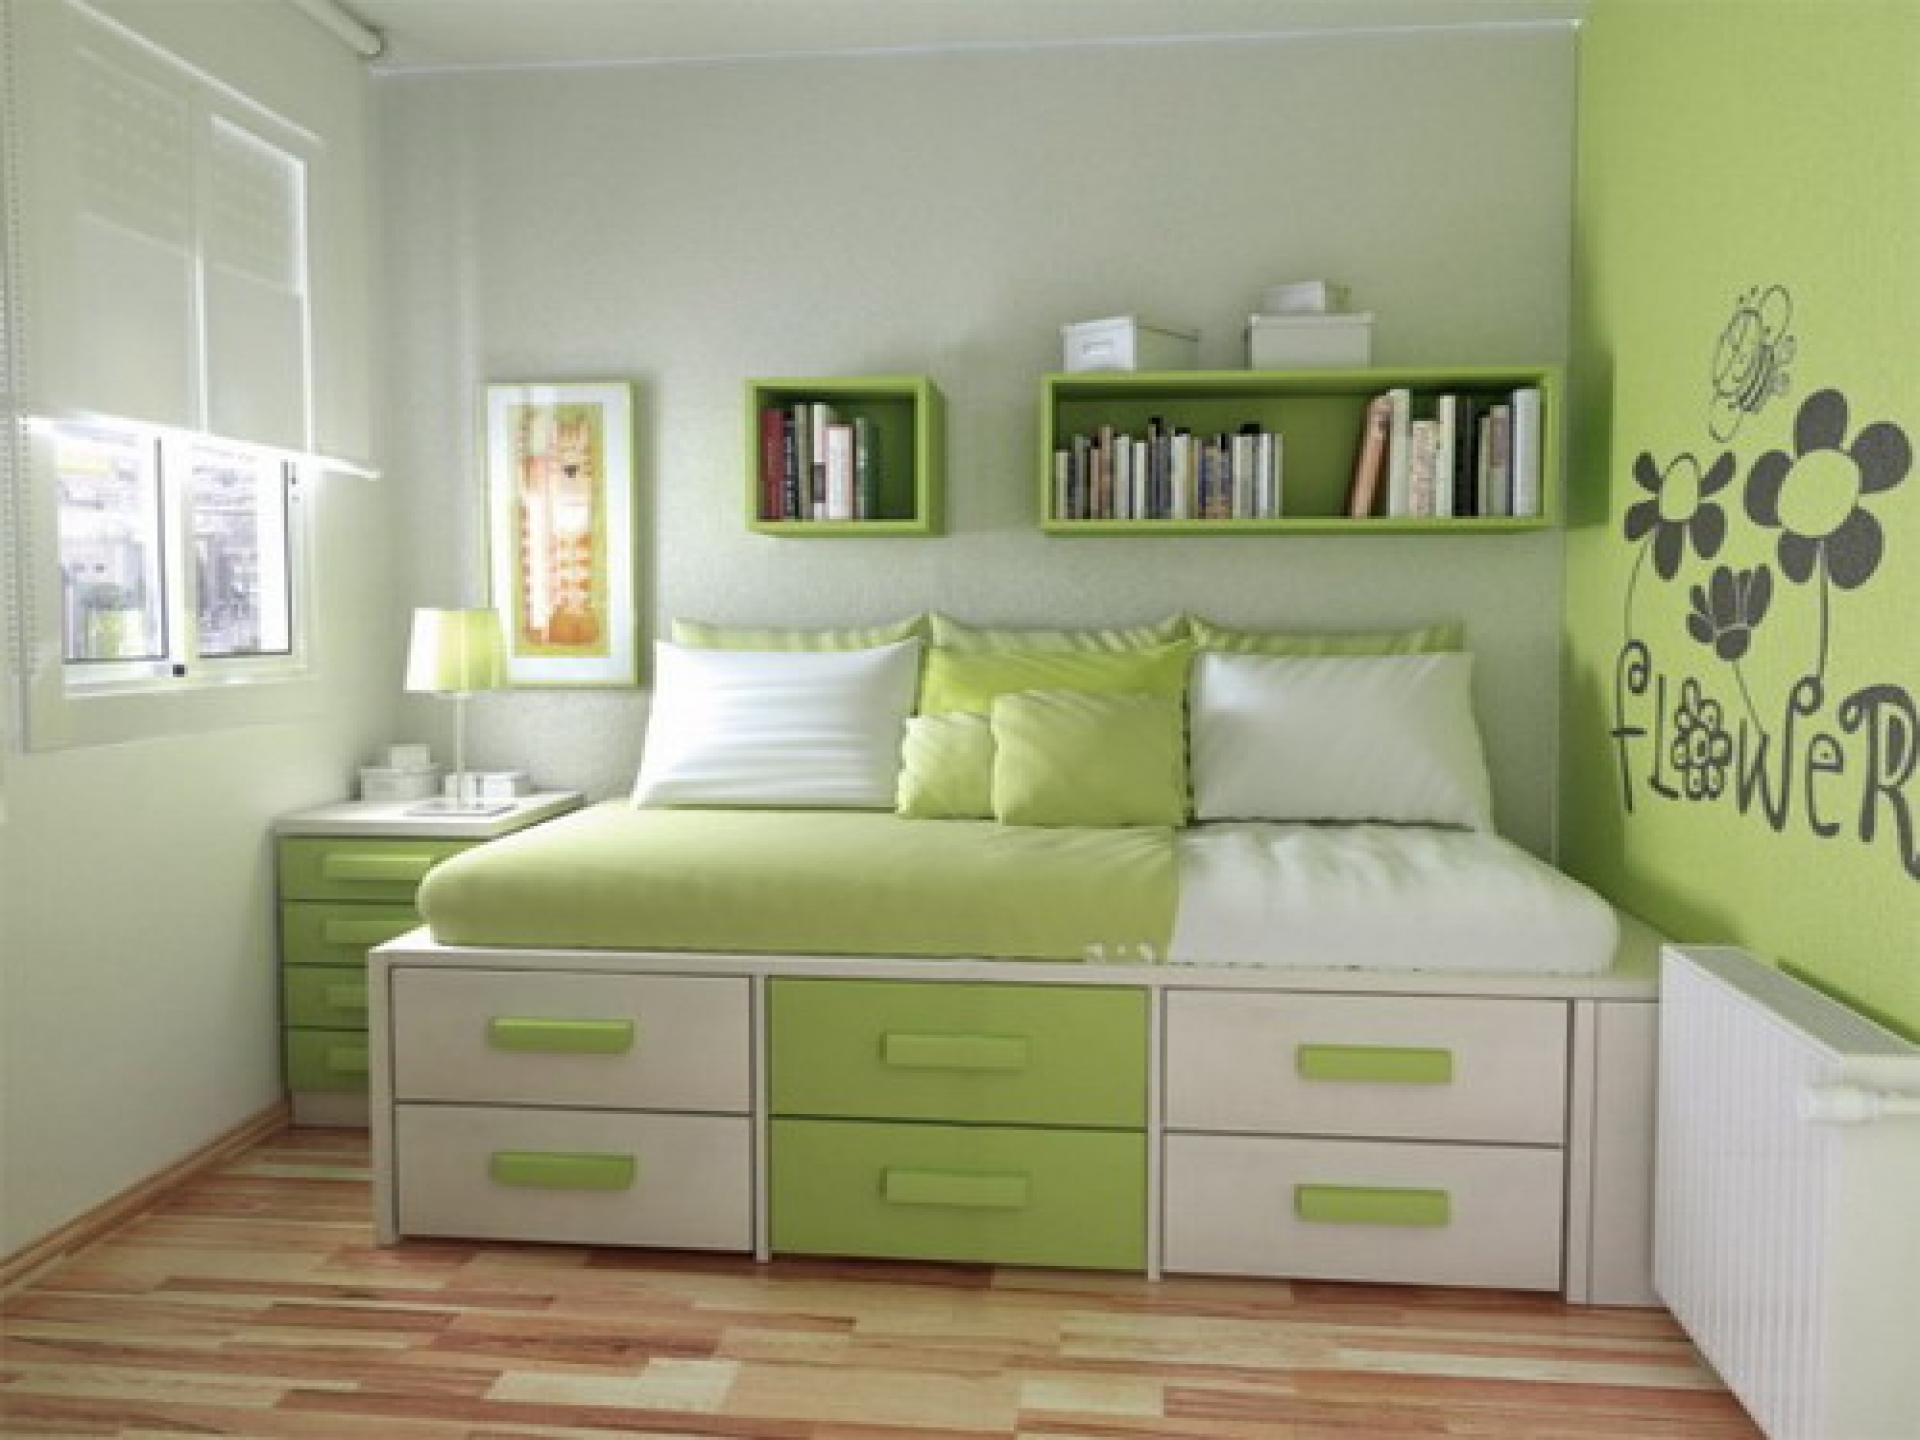 Ideas To Decorate Small Bedrooms With Double Windows